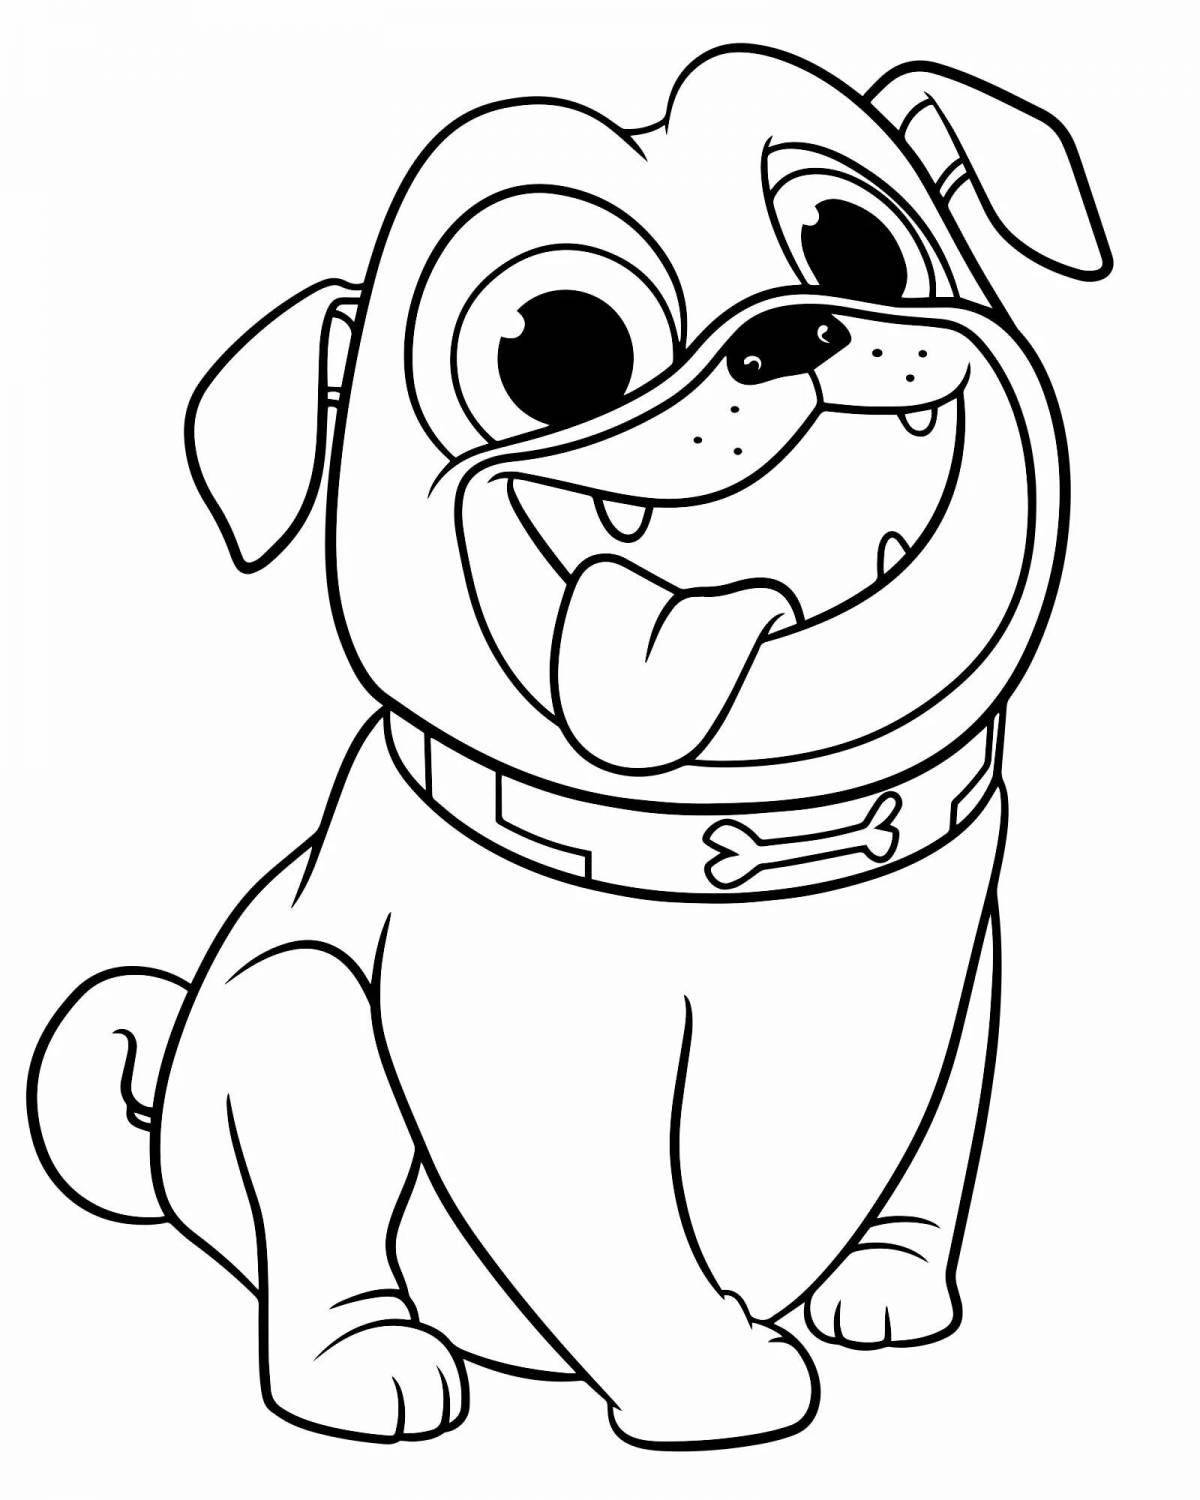 Cute coloring book popular with kids